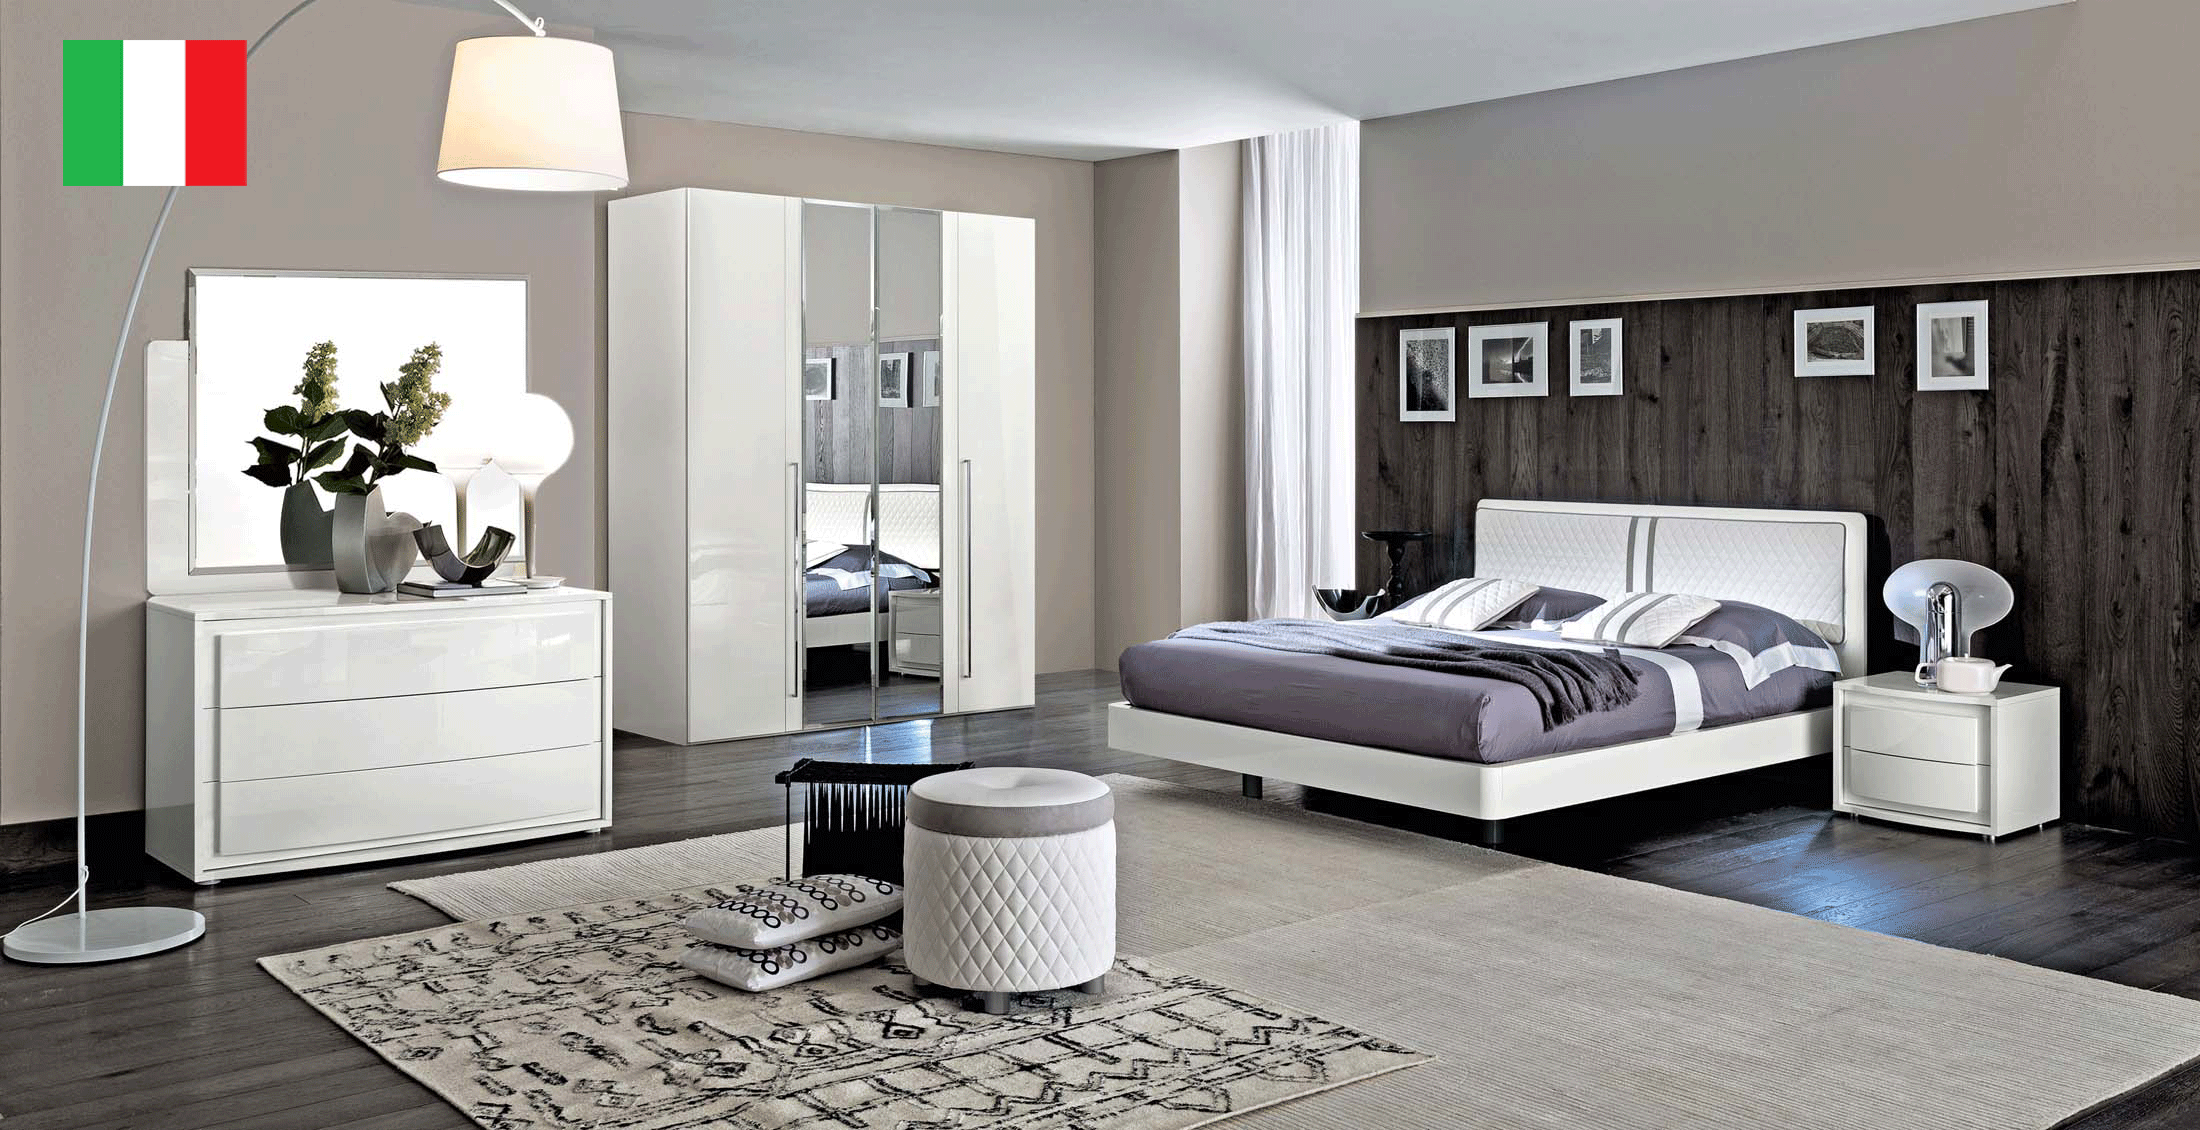 Bedroom Furniture Classic Bedrooms QS and KS Dama Bianca Bedroom by CamelGroup Italy